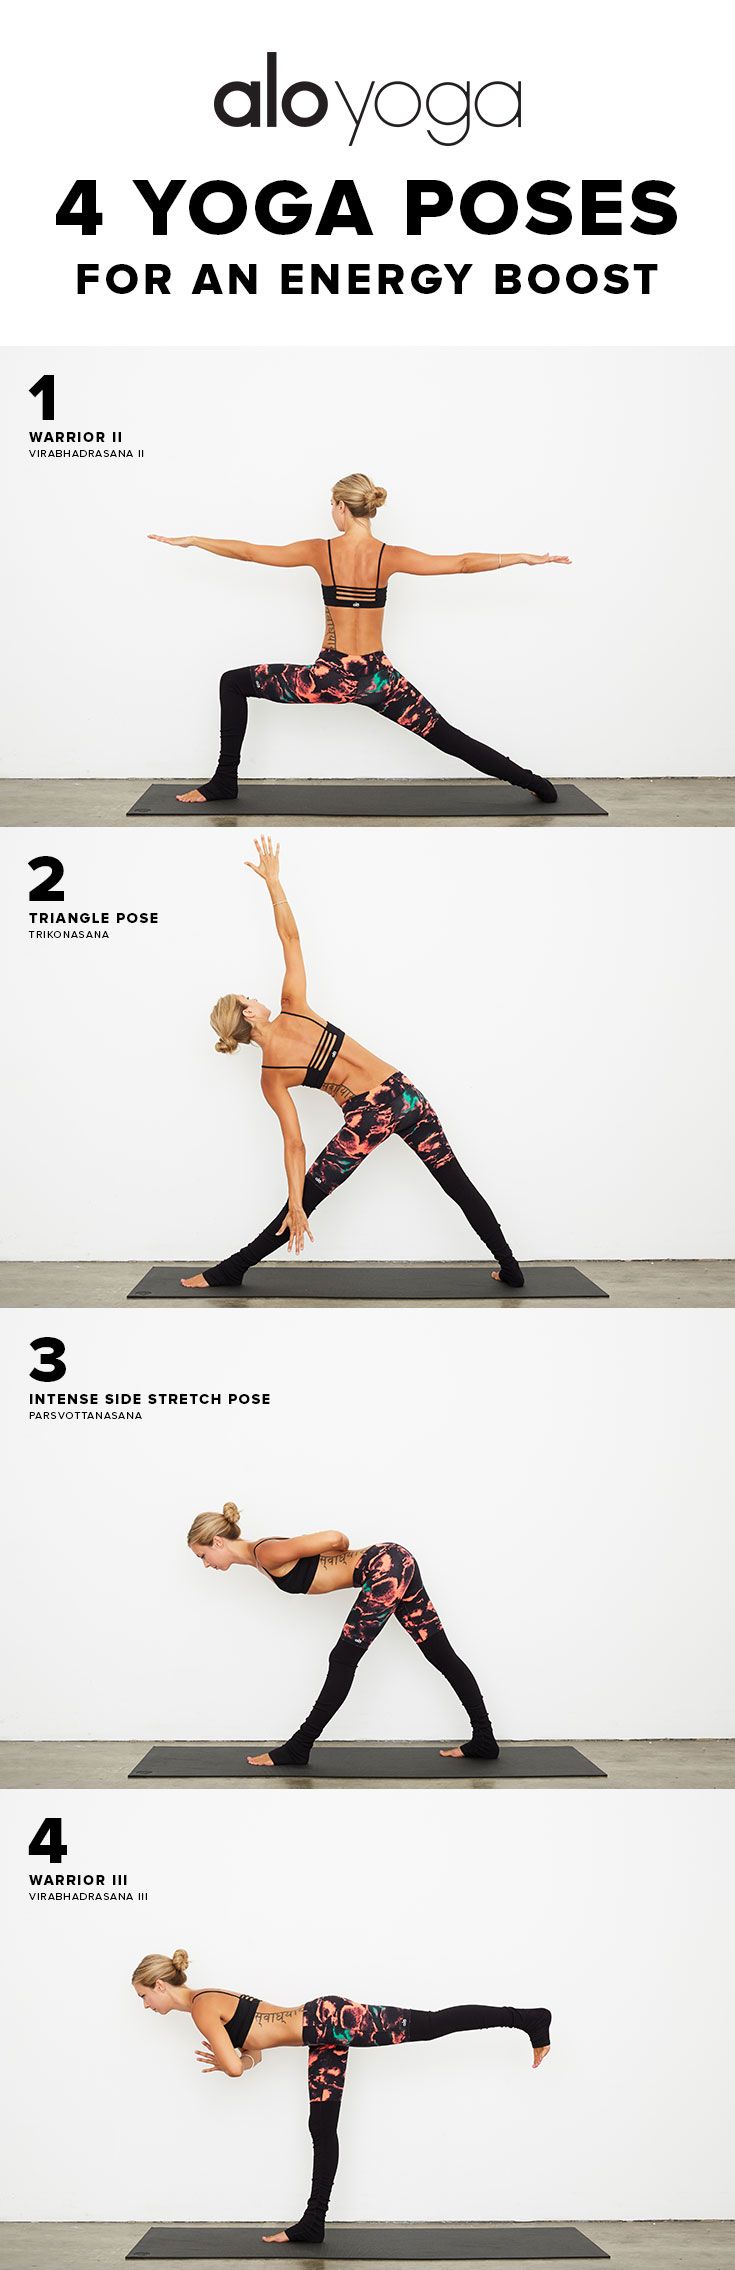 4 Yoga Poses For An Energy Boost #yoga #yogaposes